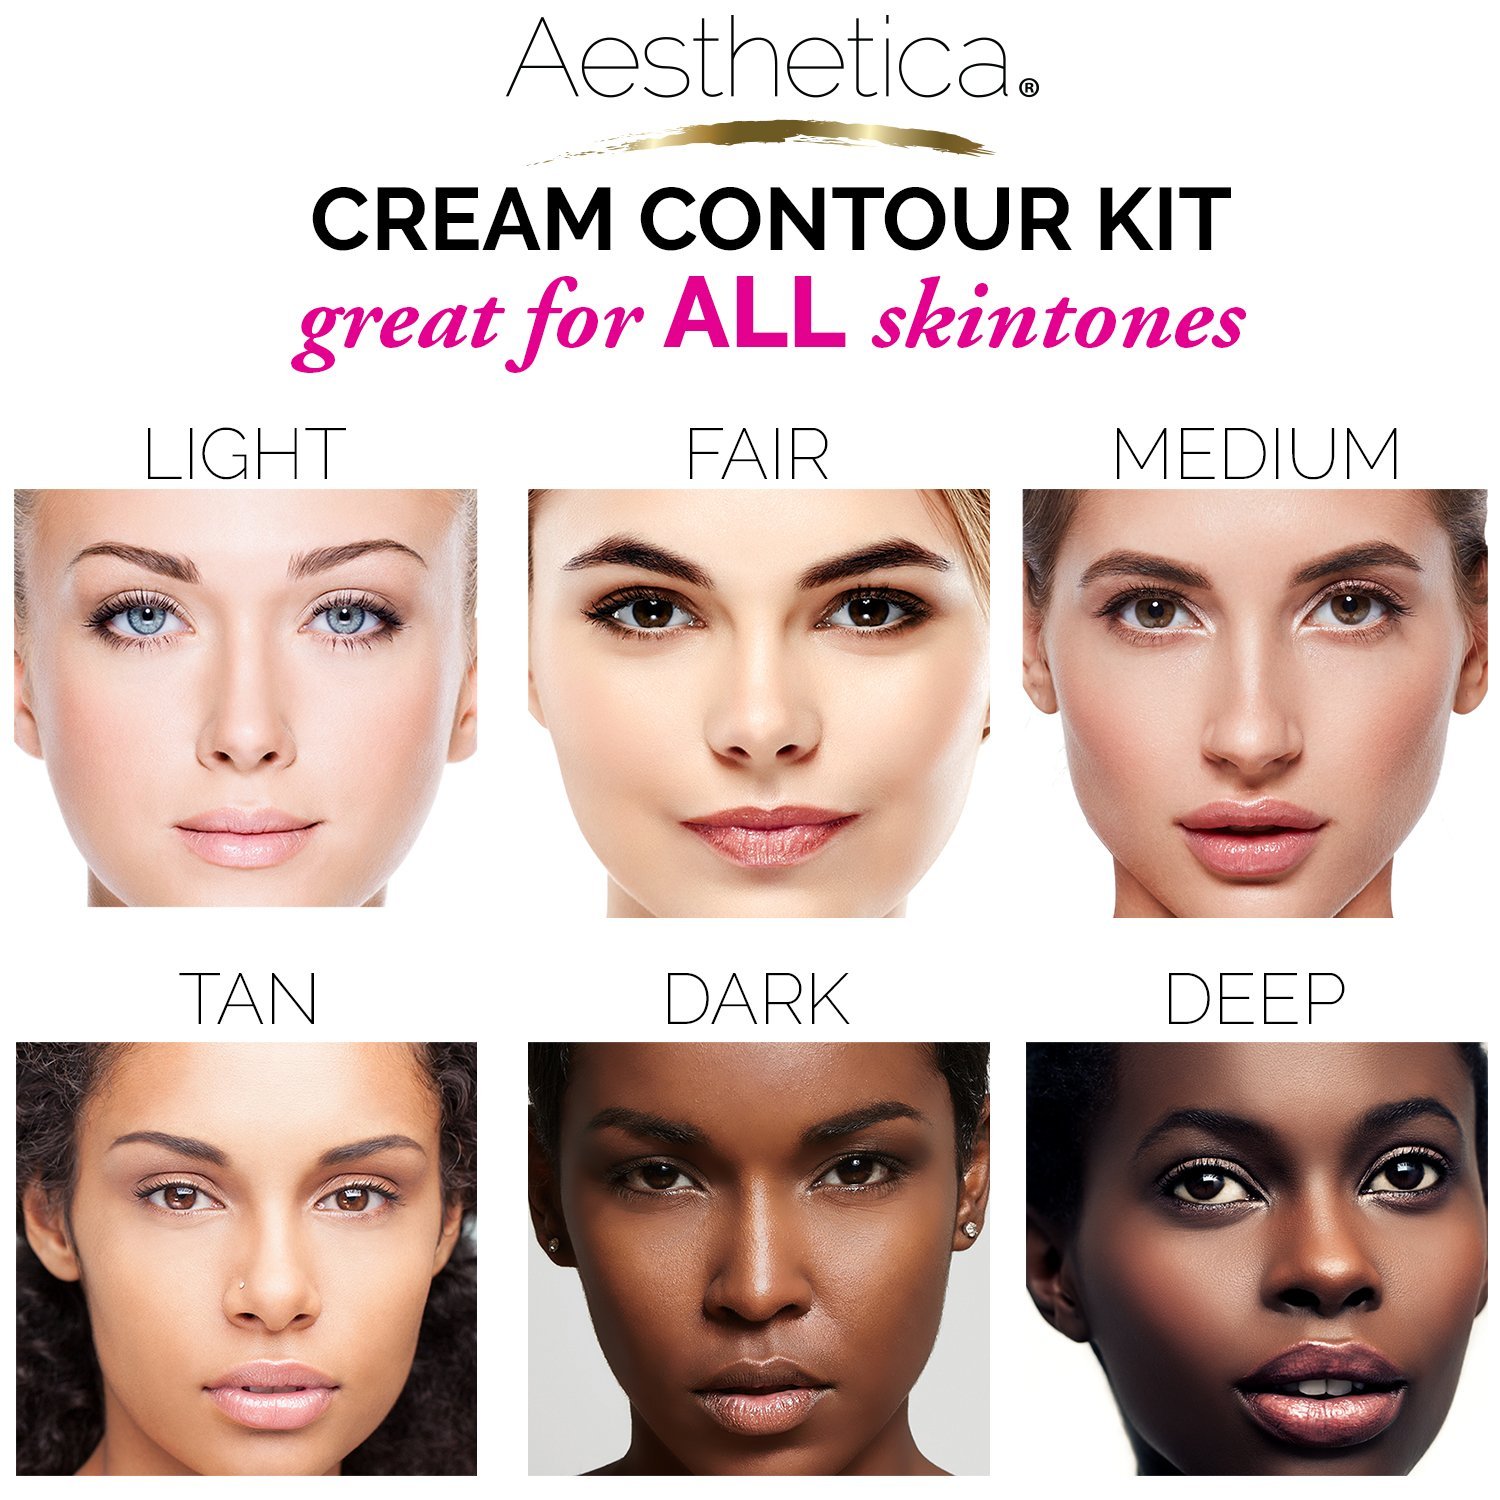  Aesthetica Cosmetics Cream Contour and Highlighting Makeup Kit - Contouring Foundation / Concealer Palette - Vegan & Cruelty Free - Step-by-Step Instructions Included